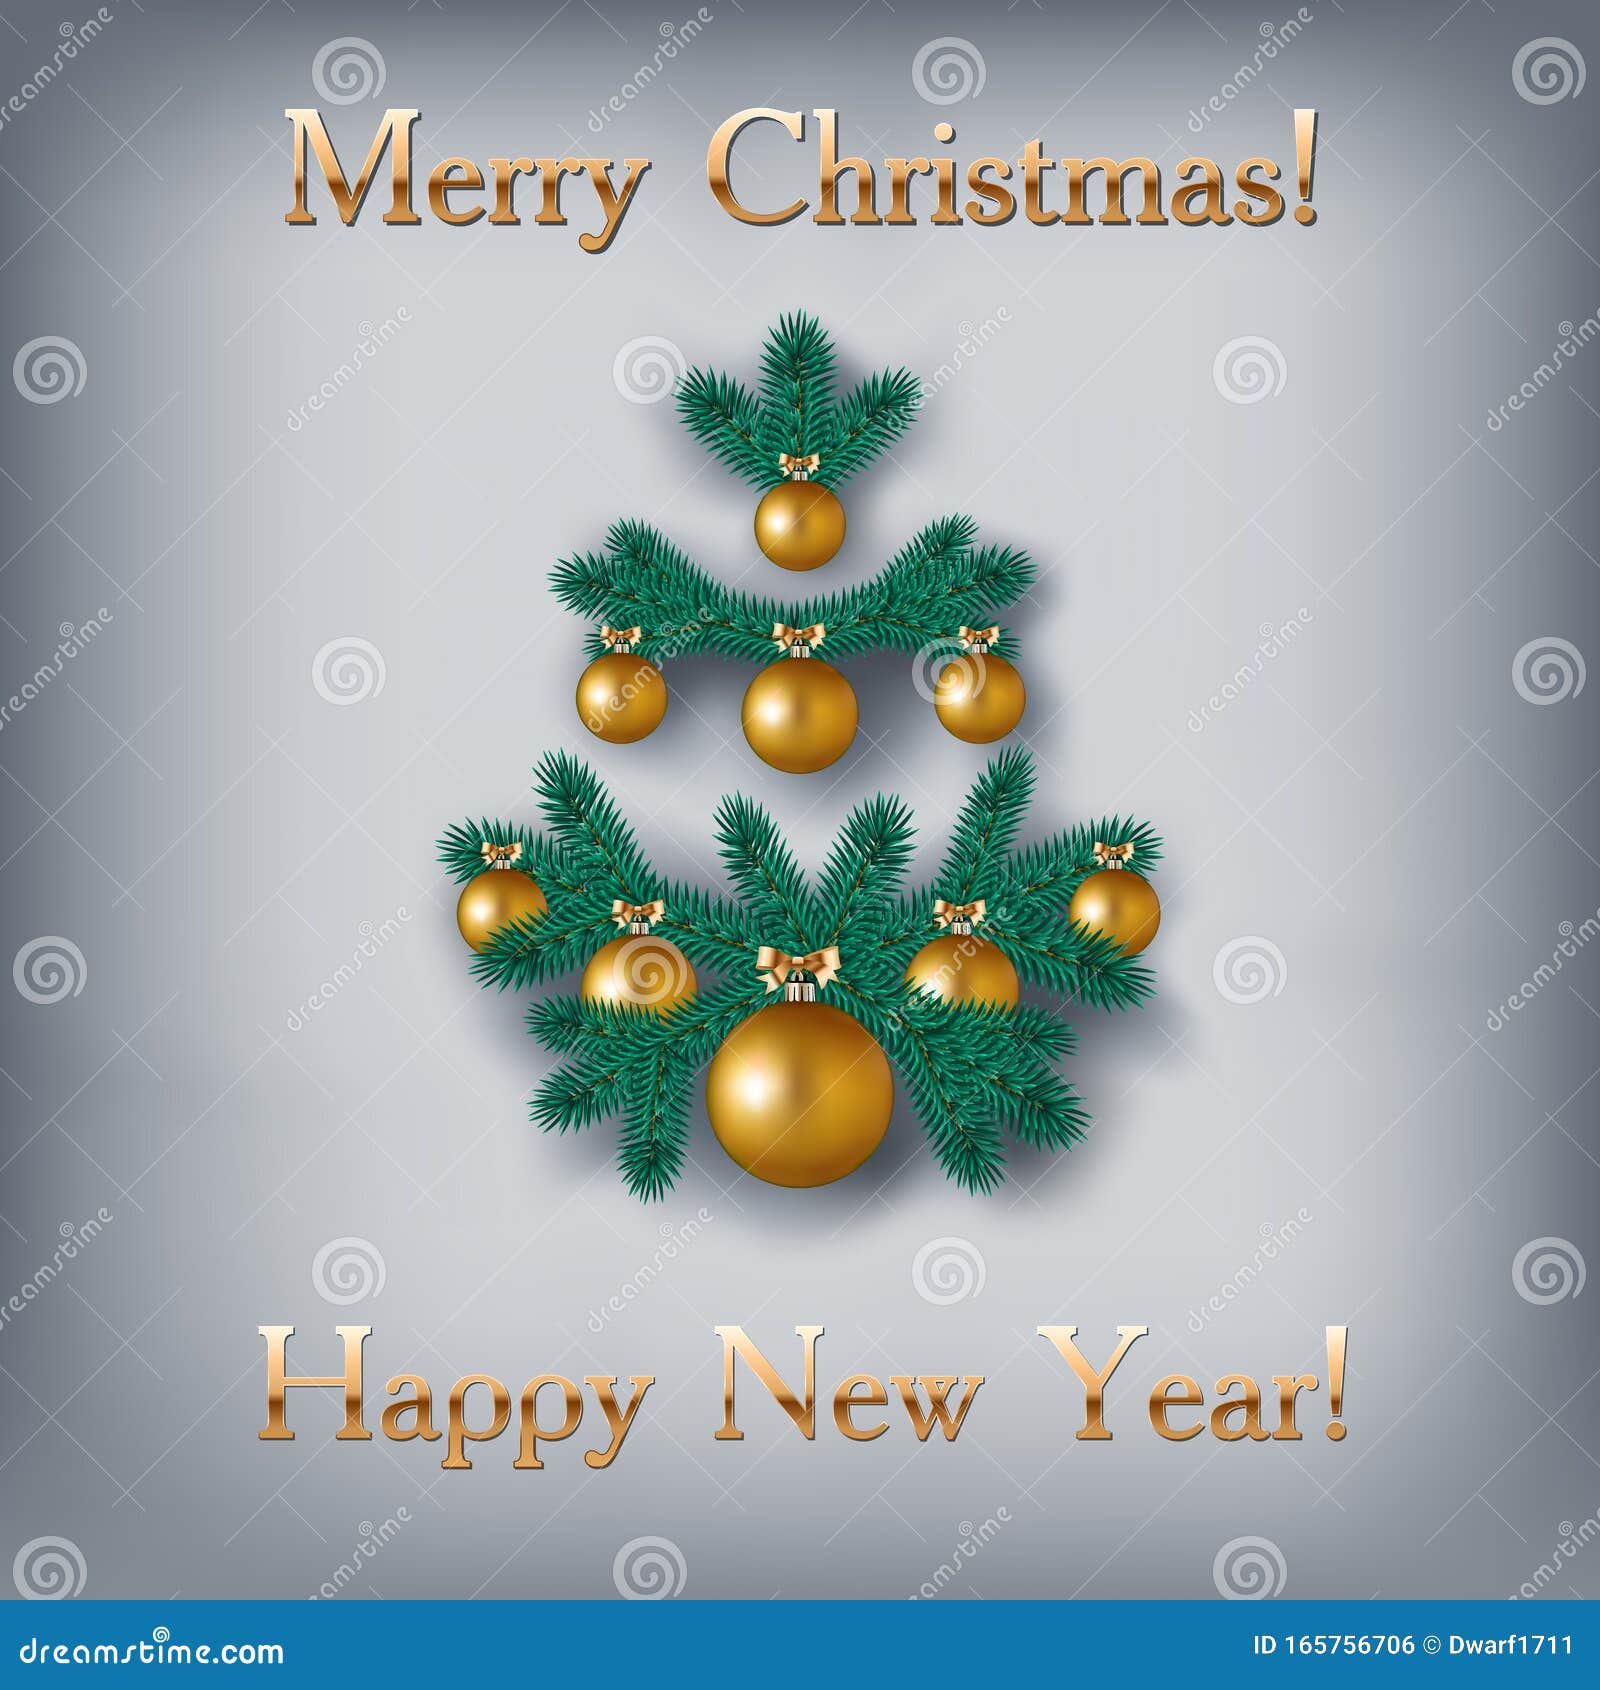 Vector square banner or social media post template with Christmas tree from spruce branches and decorative balls. Golden Merry Christmas Happy New Year text on gray background.